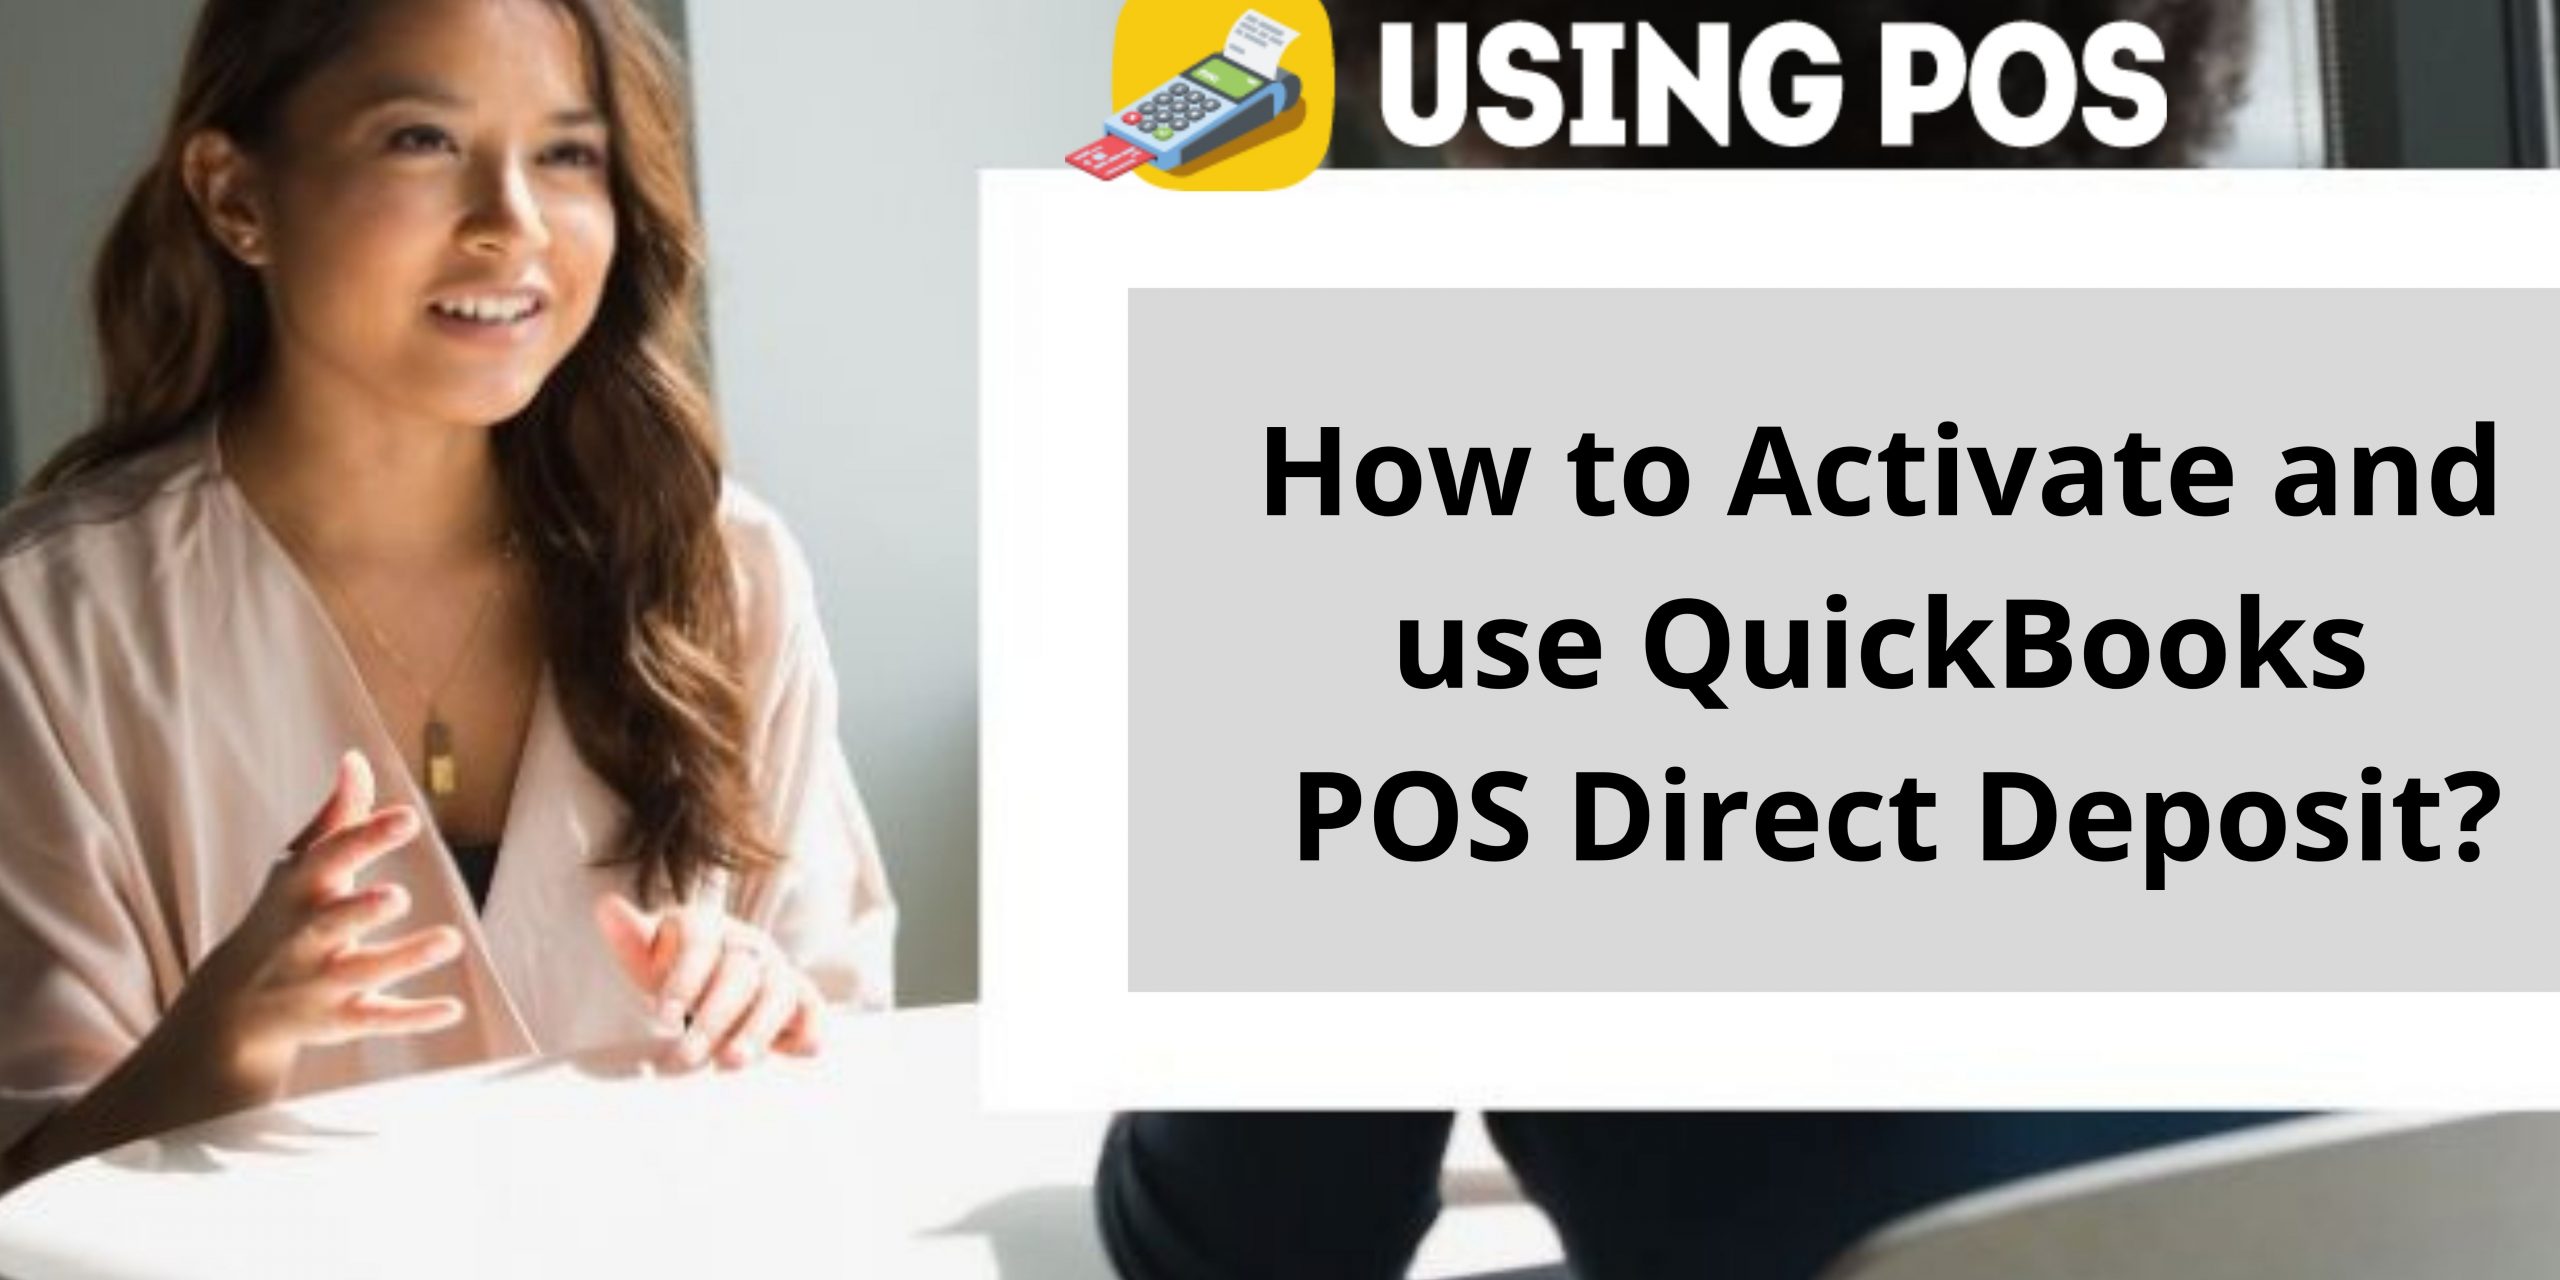 How to Activate and use QuickBooks POS Direct Deposit?